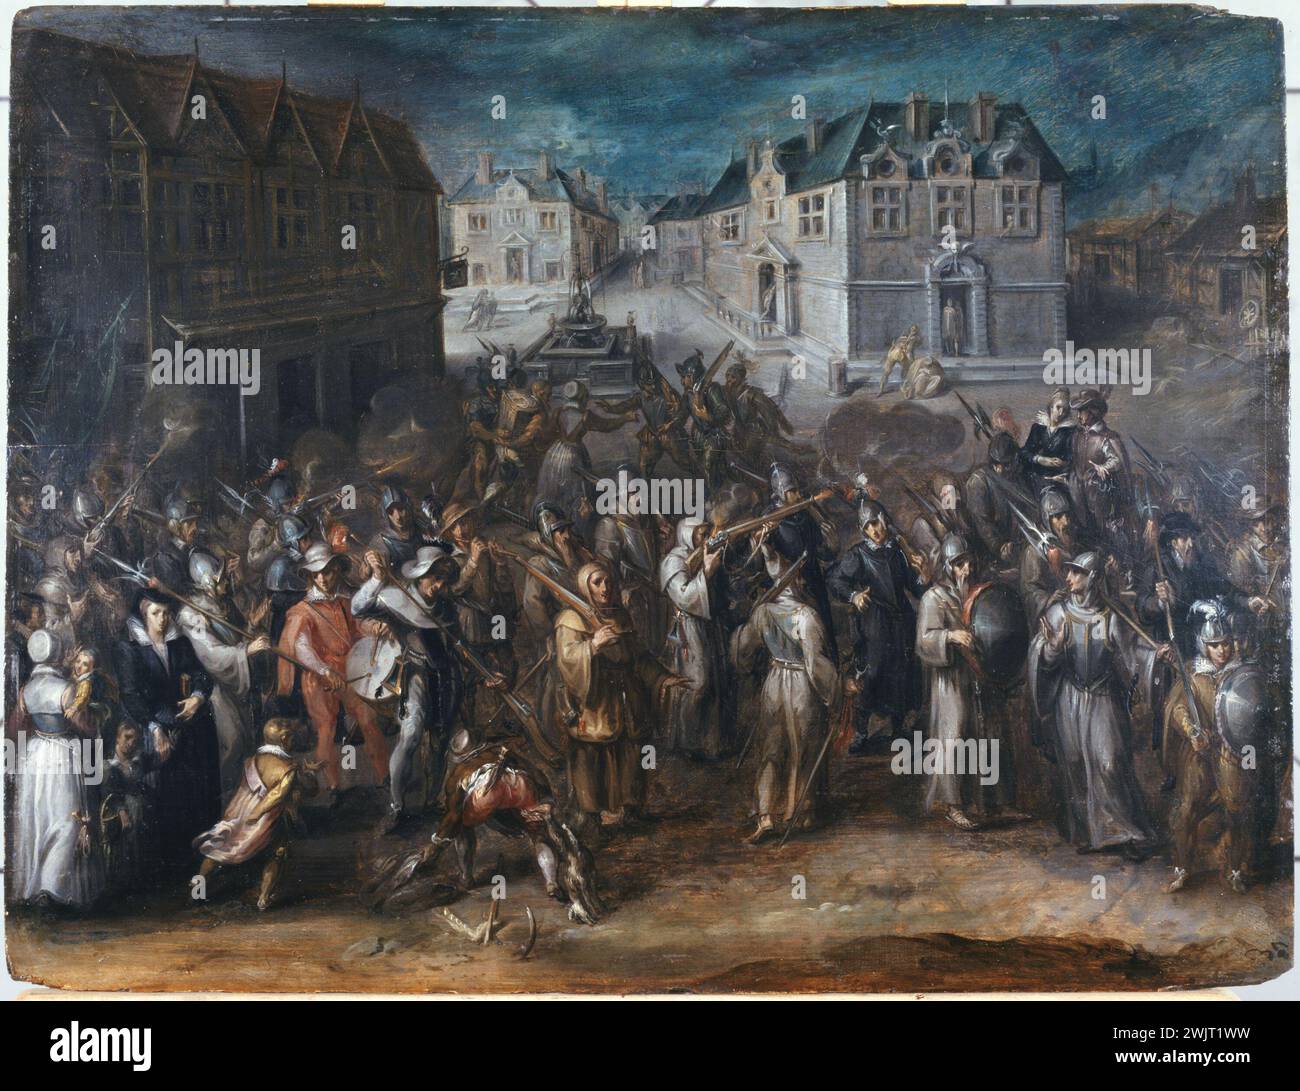 Attributed to Joos Van Winghe (1544-1603). 'Ligue procession, in 1590 or 1593'. Oil on wood. Paris, Carnavalet museum. 74593-12 Arcade, amendment king France, cortege, Catholic faith, oil on wood, league, opposition, place of Greve, going out, procession Stock Photo